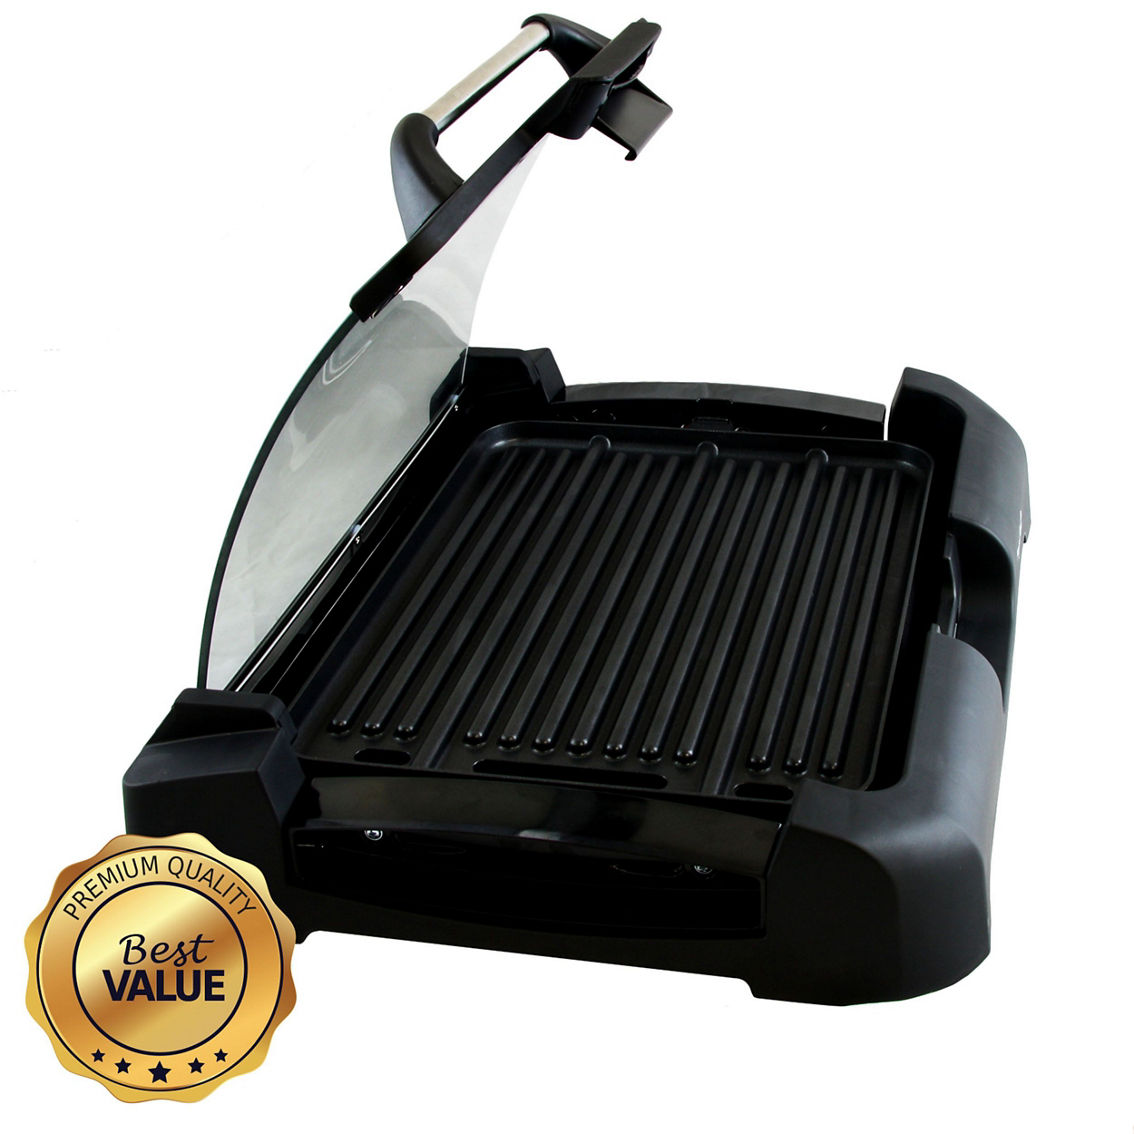 Megachef Reversible Indoor Grill and Griddle with Removable Glass Lid - Image 4 of 5